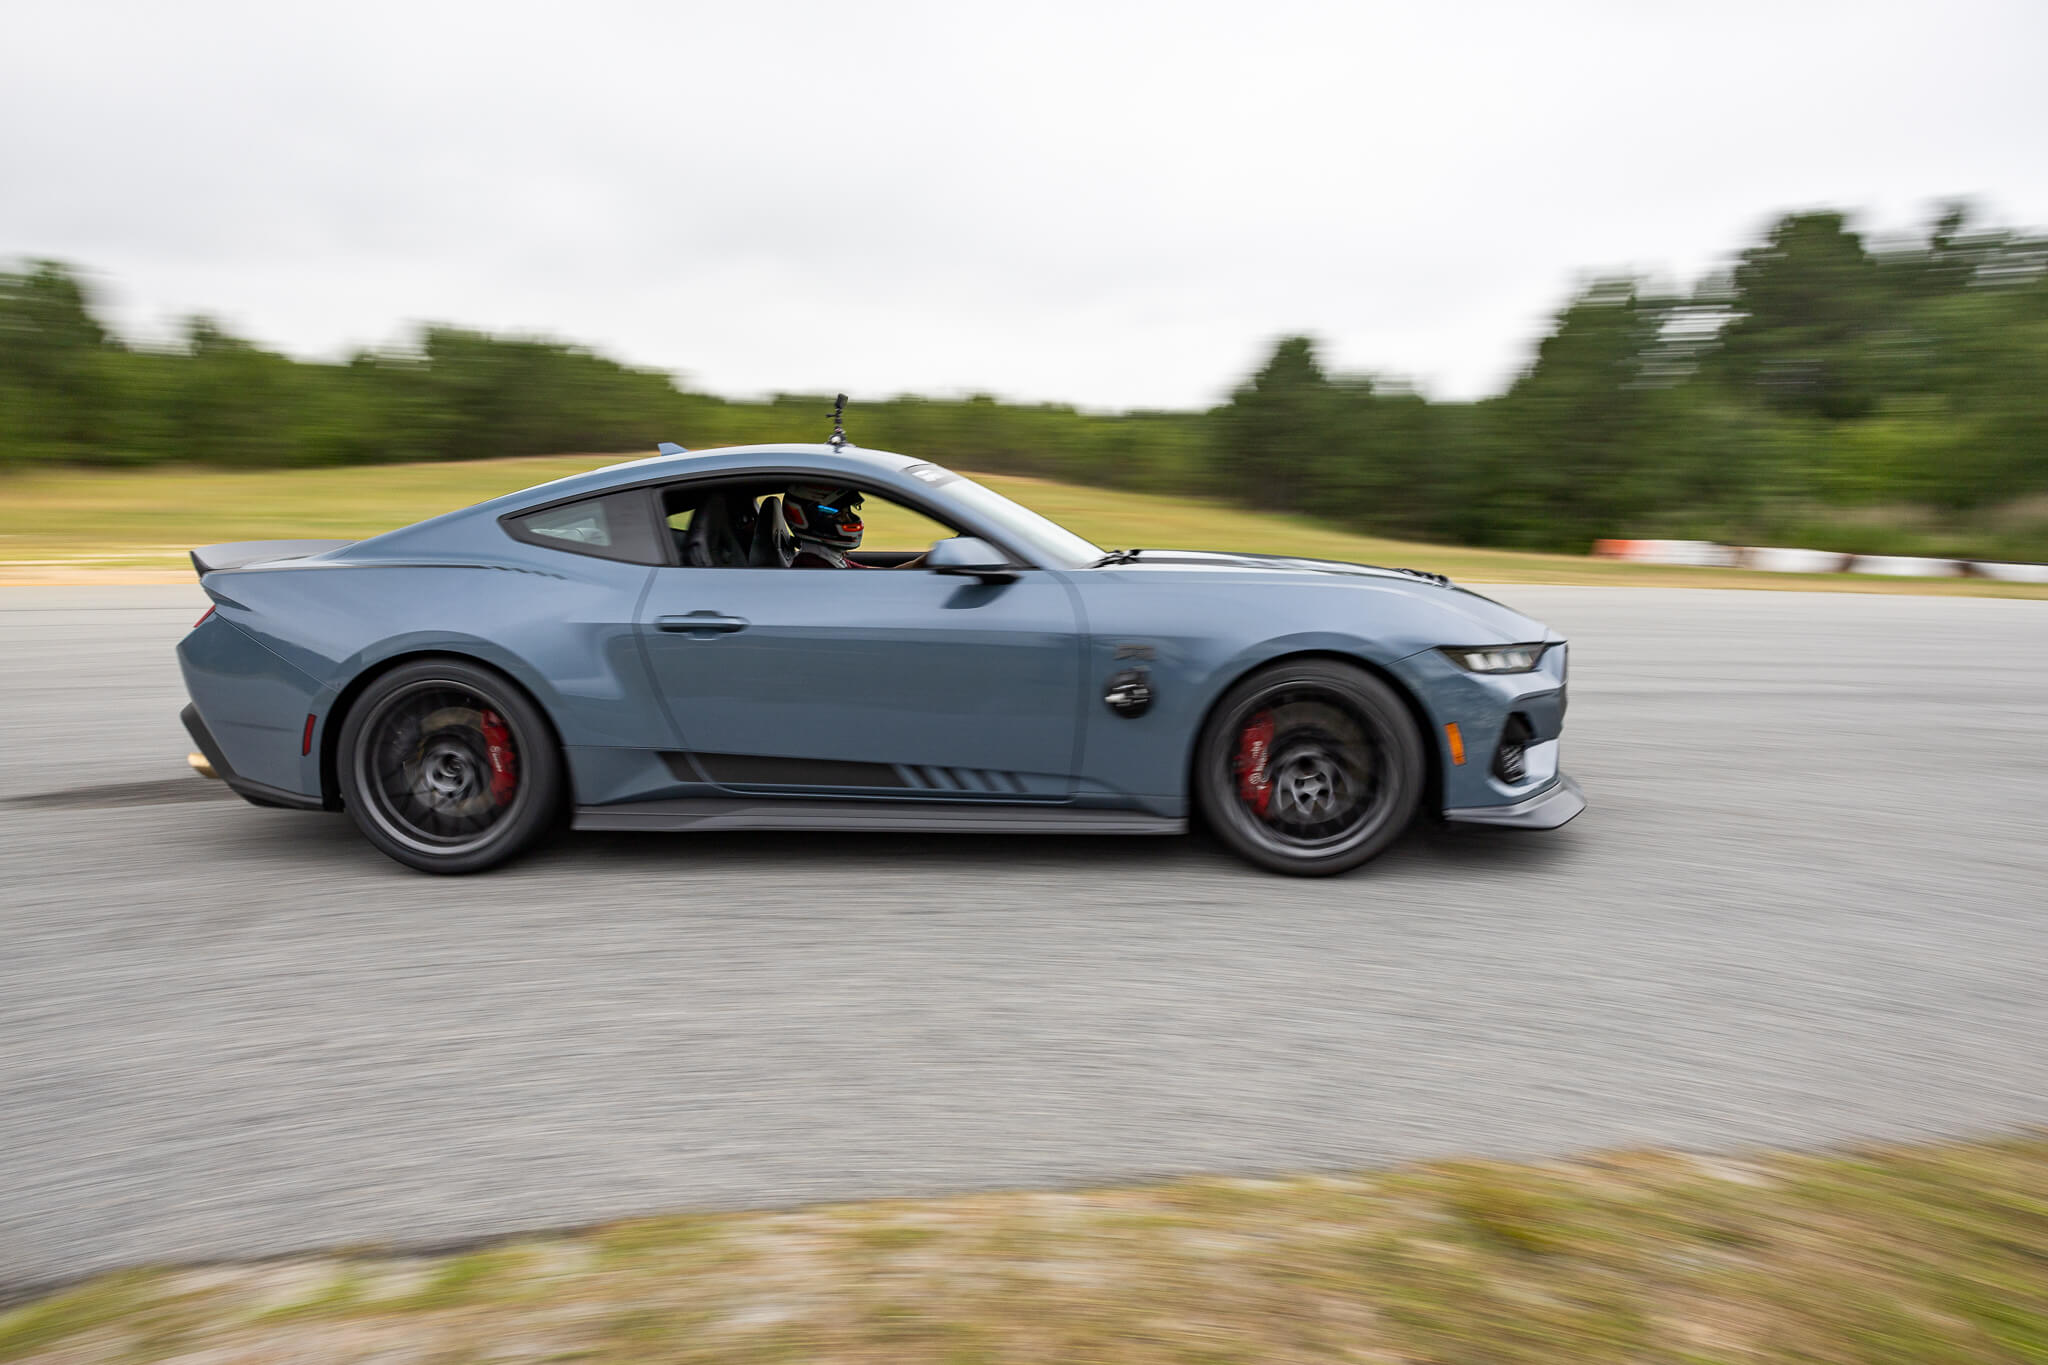 S650 Mustang RTR Vehicles Suspension Validation Testing on the 7th Generation Mustang JCOL4676